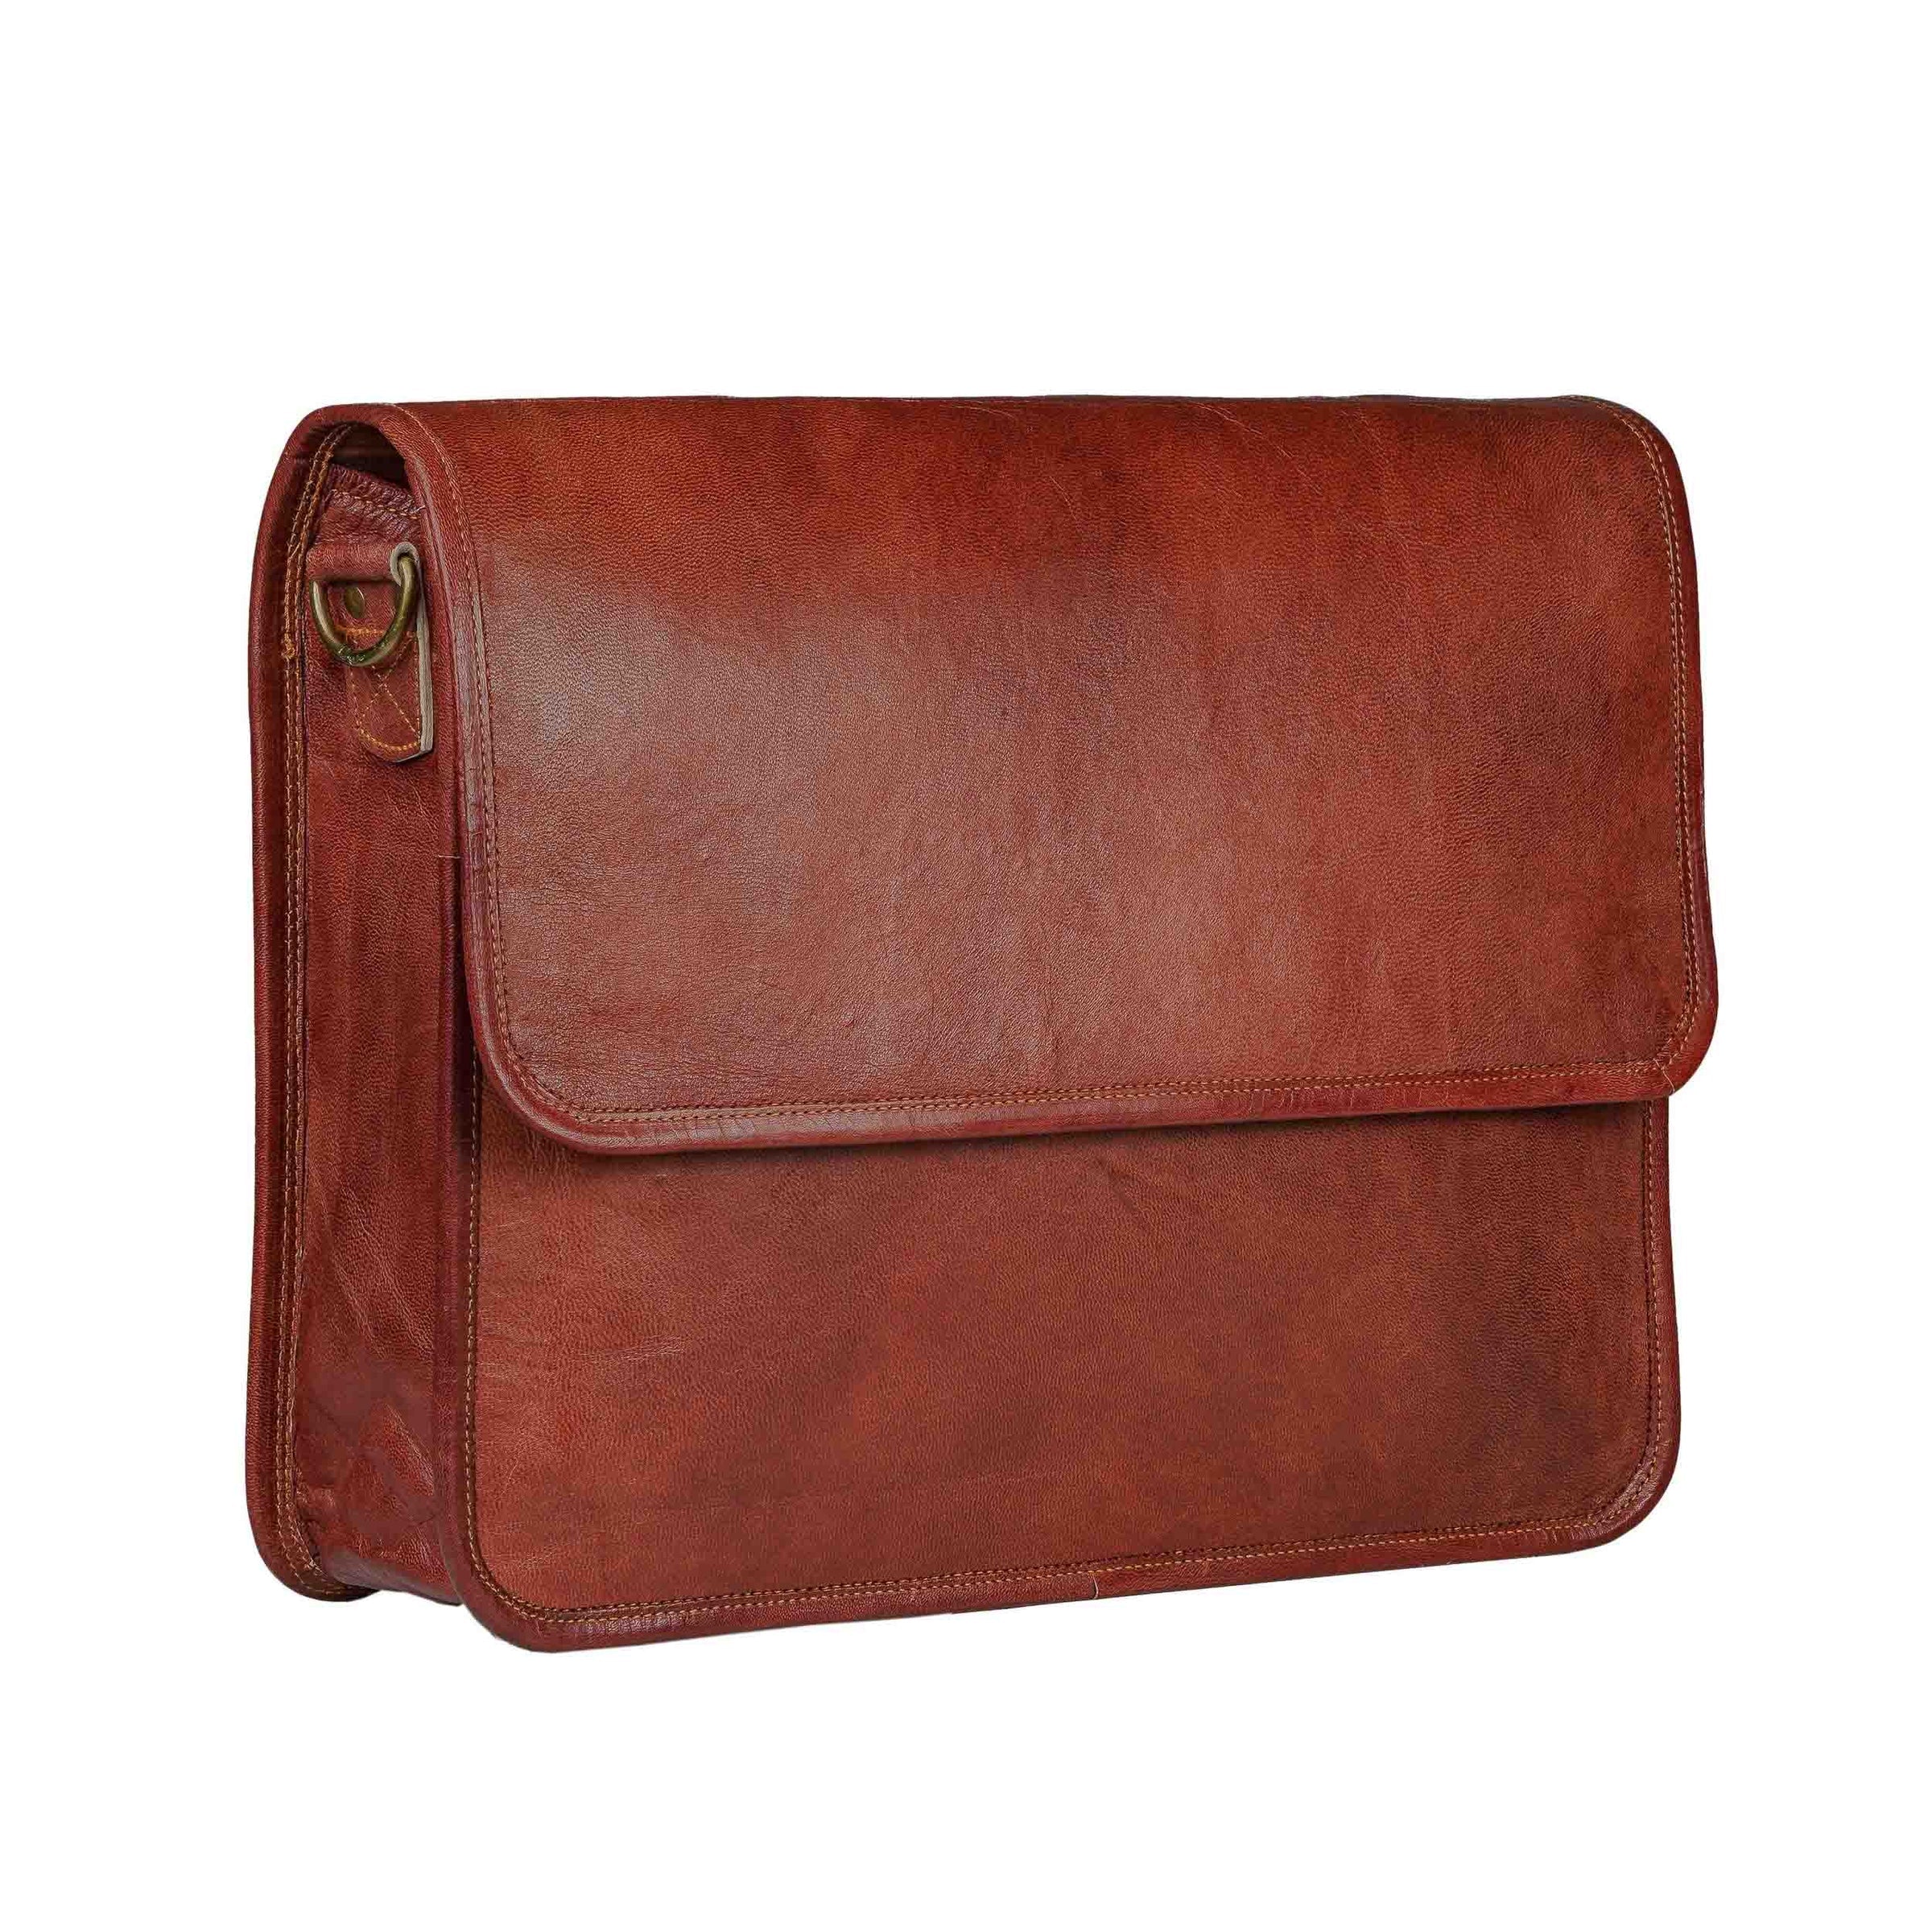 brown leather  messenger bag for casuals